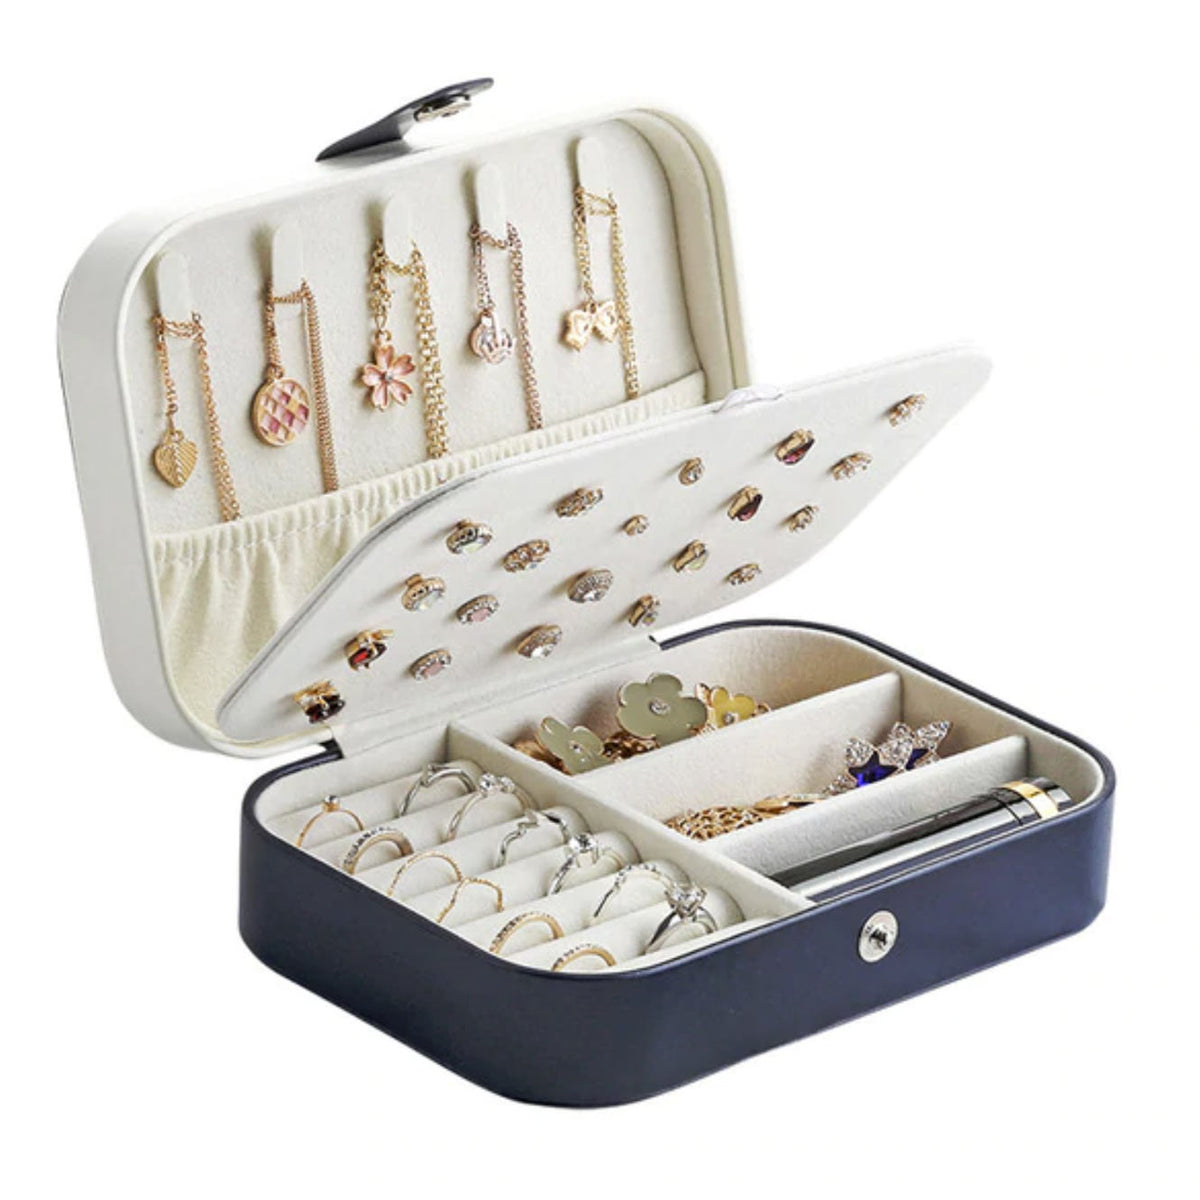 Jewellery Case and Storage Box in Cream and Blue colours - DEMI+CO ...